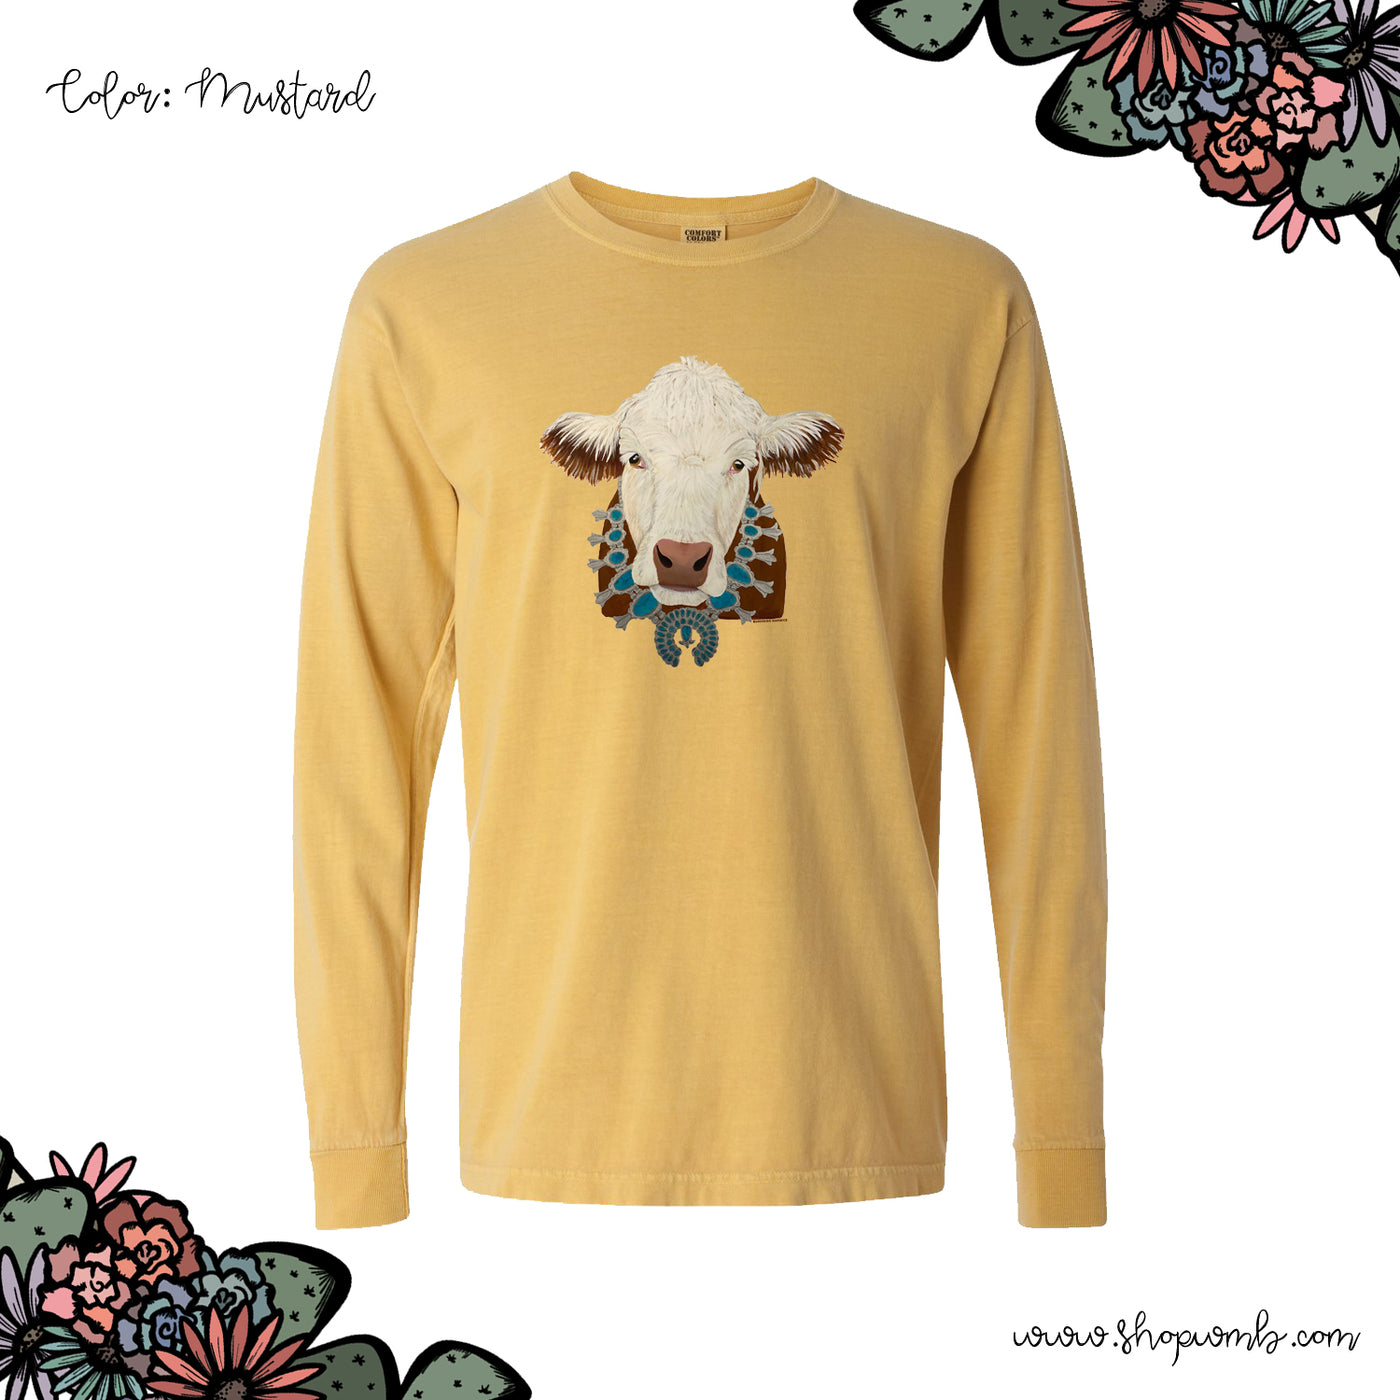 Hereford Squash Blossom LONG SLEEVE T-Shirt (S-3XL) - Multiple Colors!